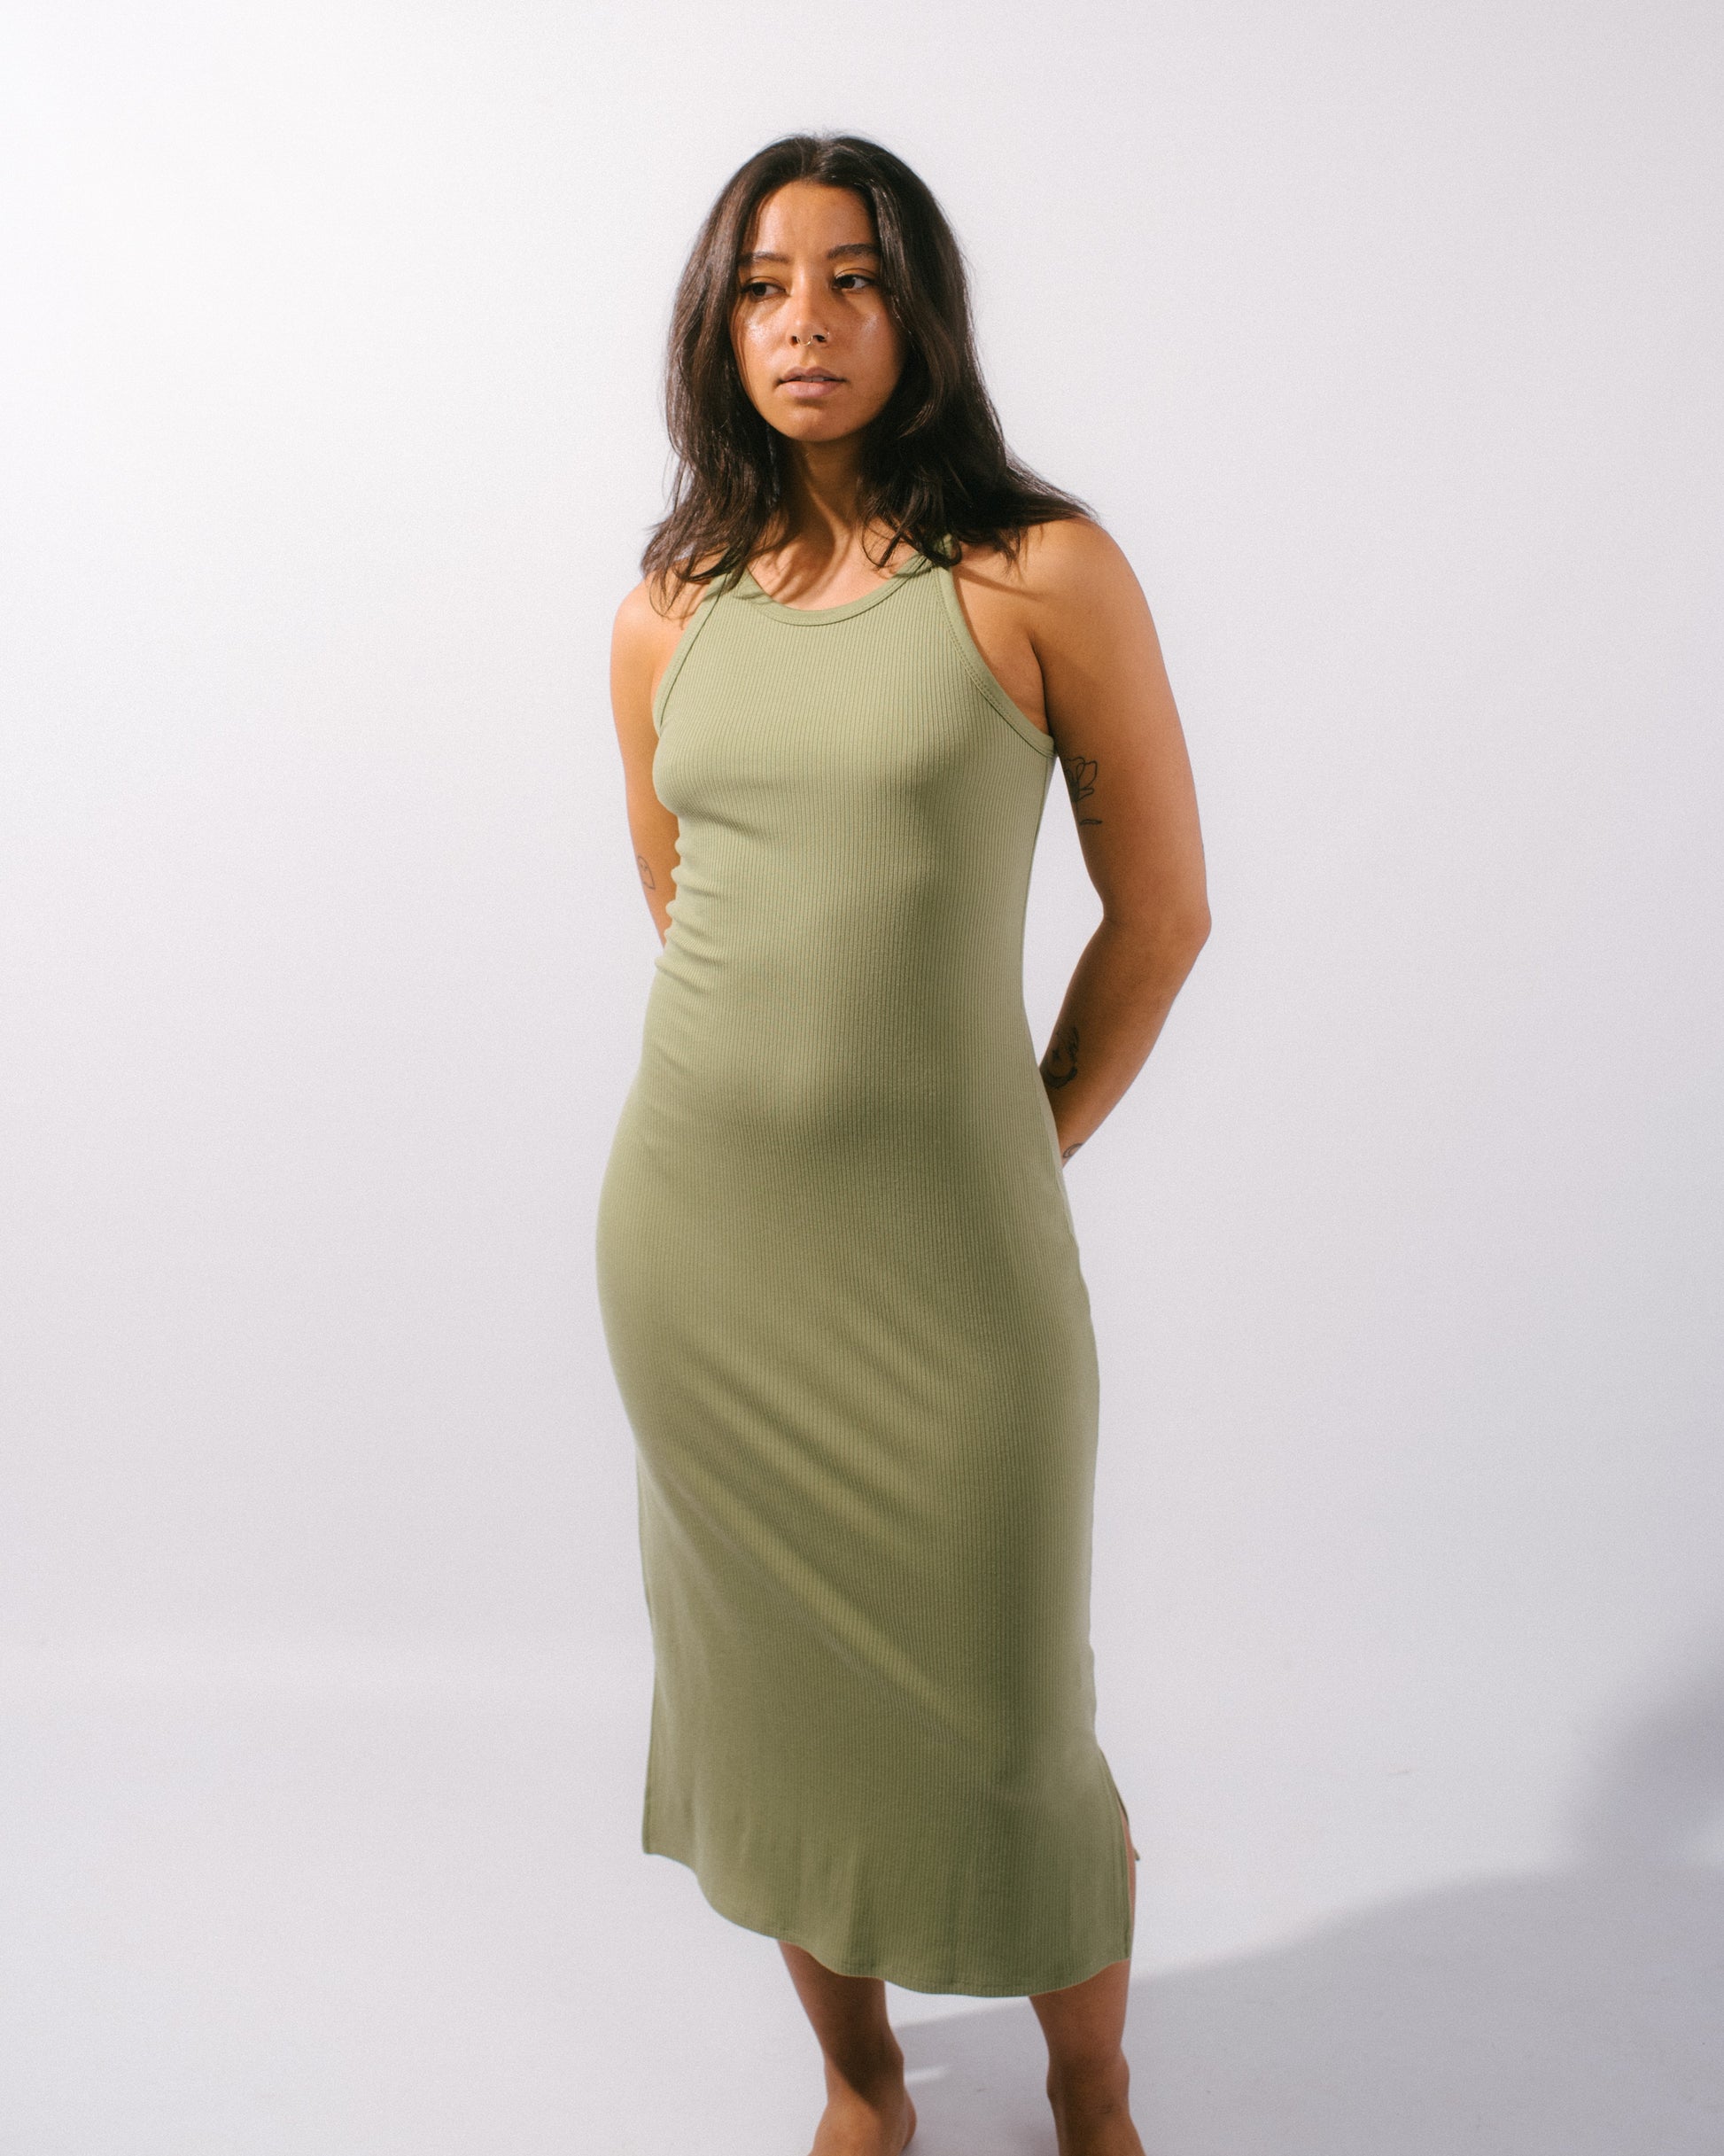 vintage ribbed midi dress in green fatigues on model